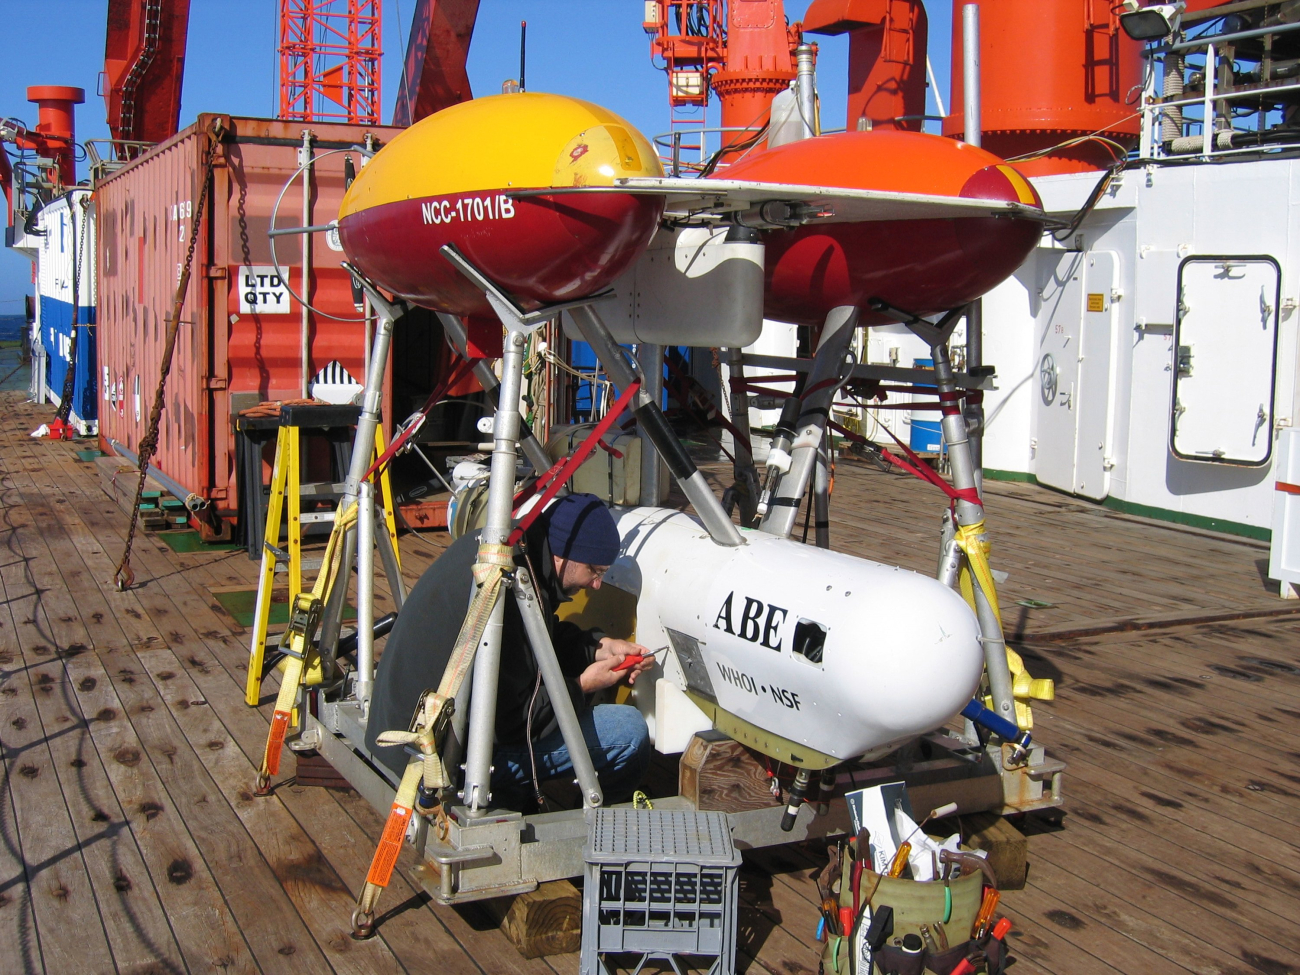 Andy Billings, an engineering assistant at Woods Hole Oceanographic Institution, makes final checks on ABE (the autonomous benthic explorer) leading up to itsfirst dive at Brothers Volcano